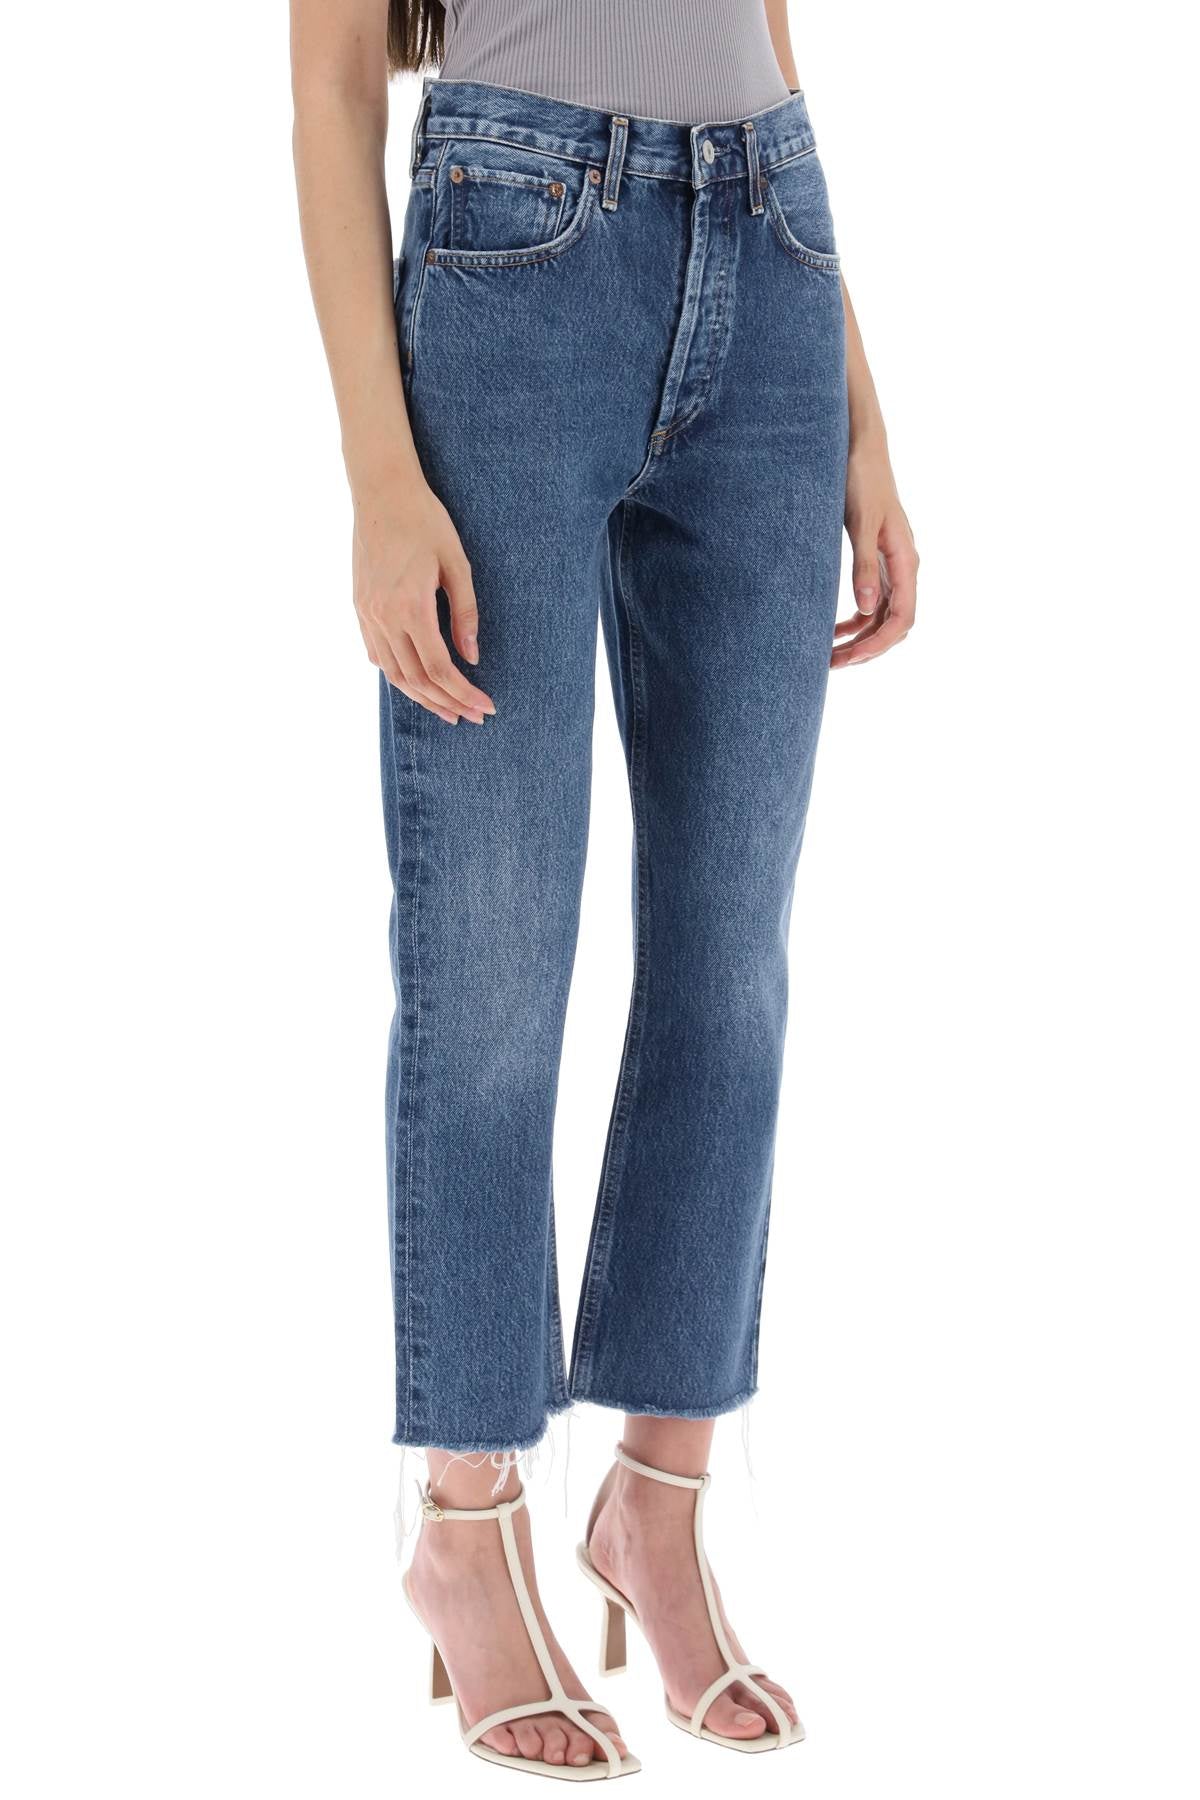 Agolde riley cropped jeans-1